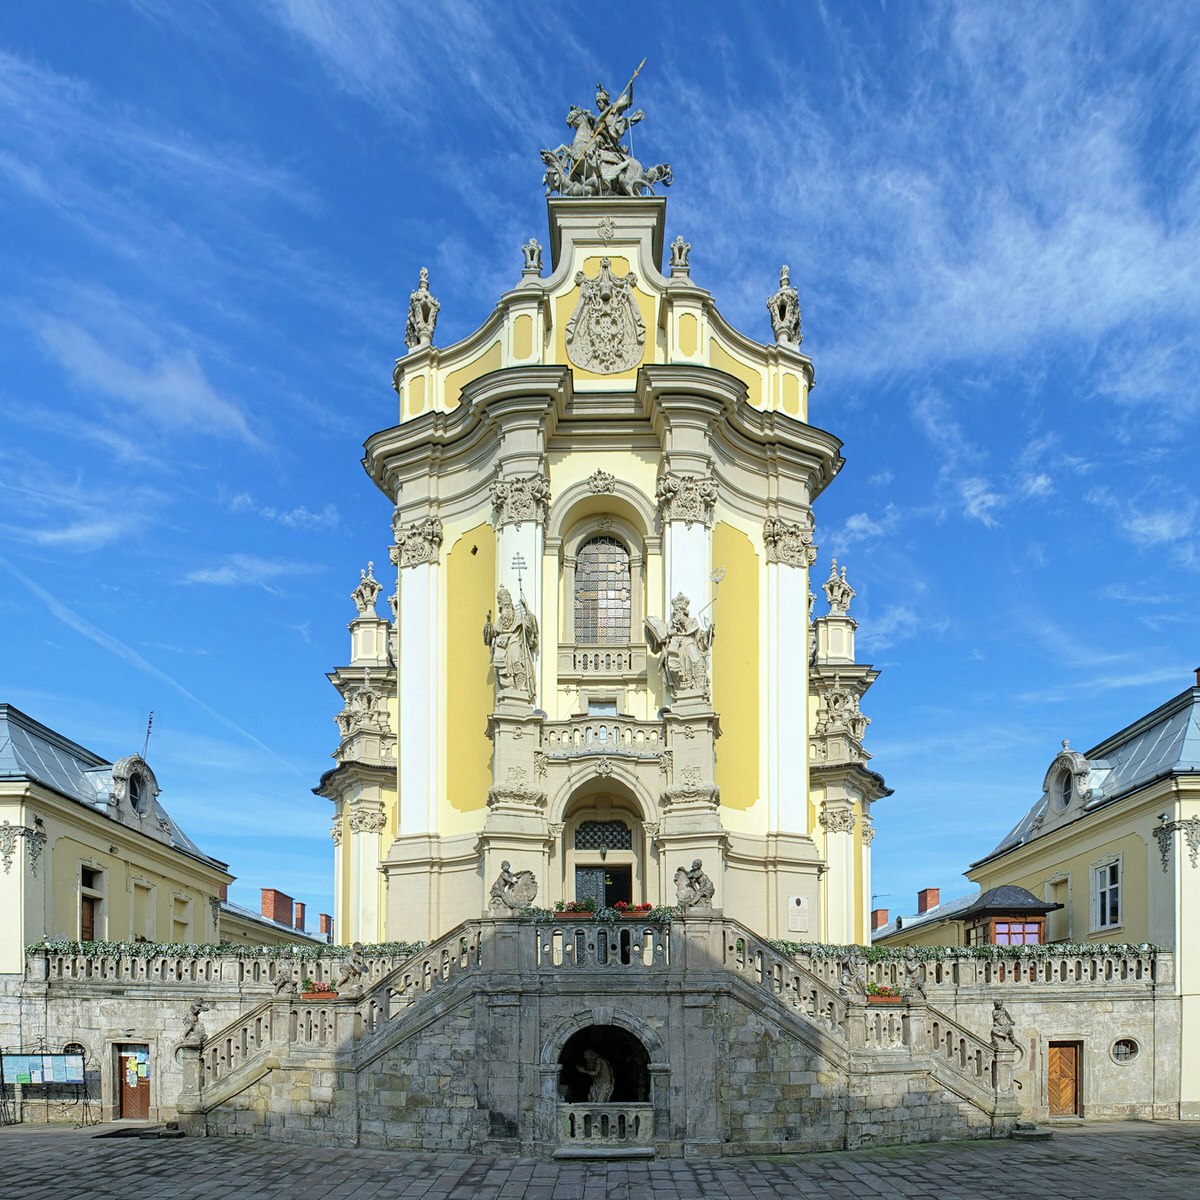 Facade of St. George's Cathedral in Lviv, Ukraine; Shutterstock ID 180079754; Your name (First / Last): Emma Sparks; GL account no.: 65050; Netsuite department name: Online Editorial; Full Product or Project name including edition: Best in Europe POI updates